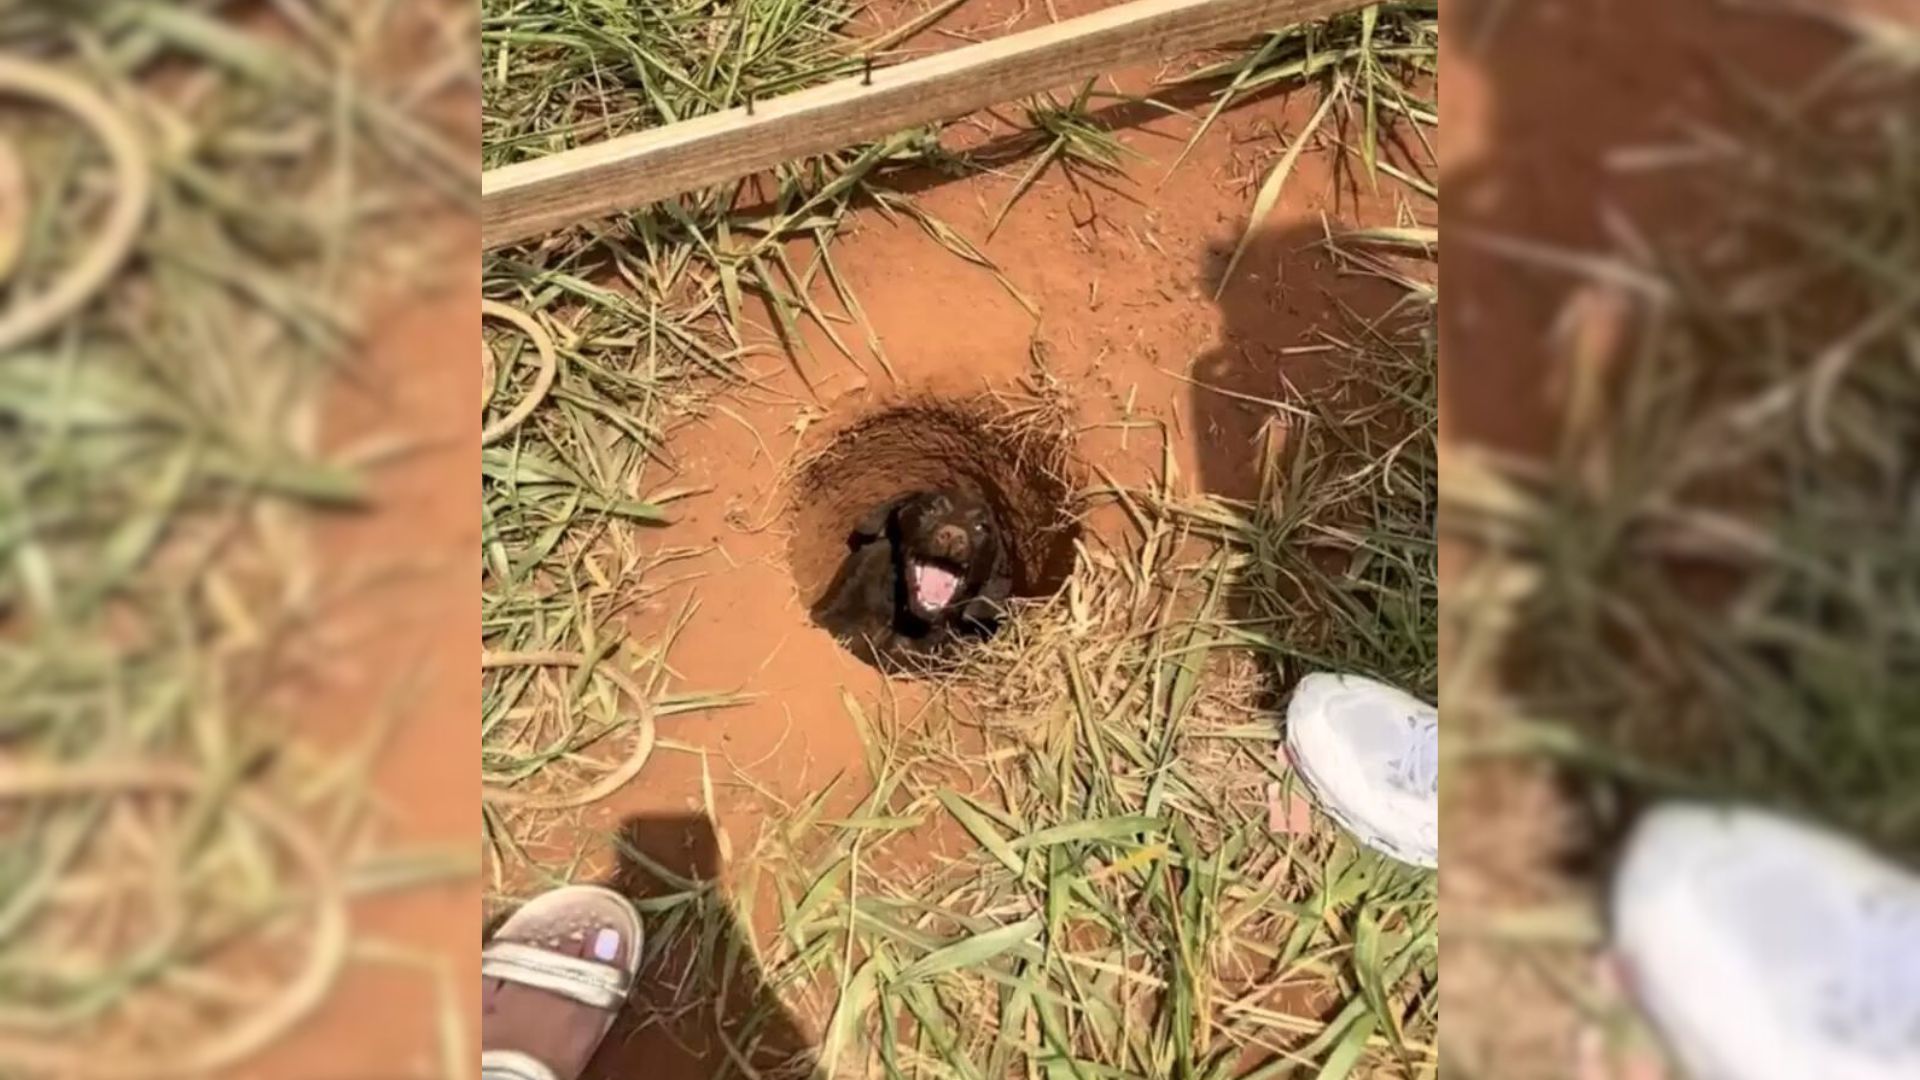 Boy Walking Home From School Shocked To Discover A Furry Surprise In A Hole